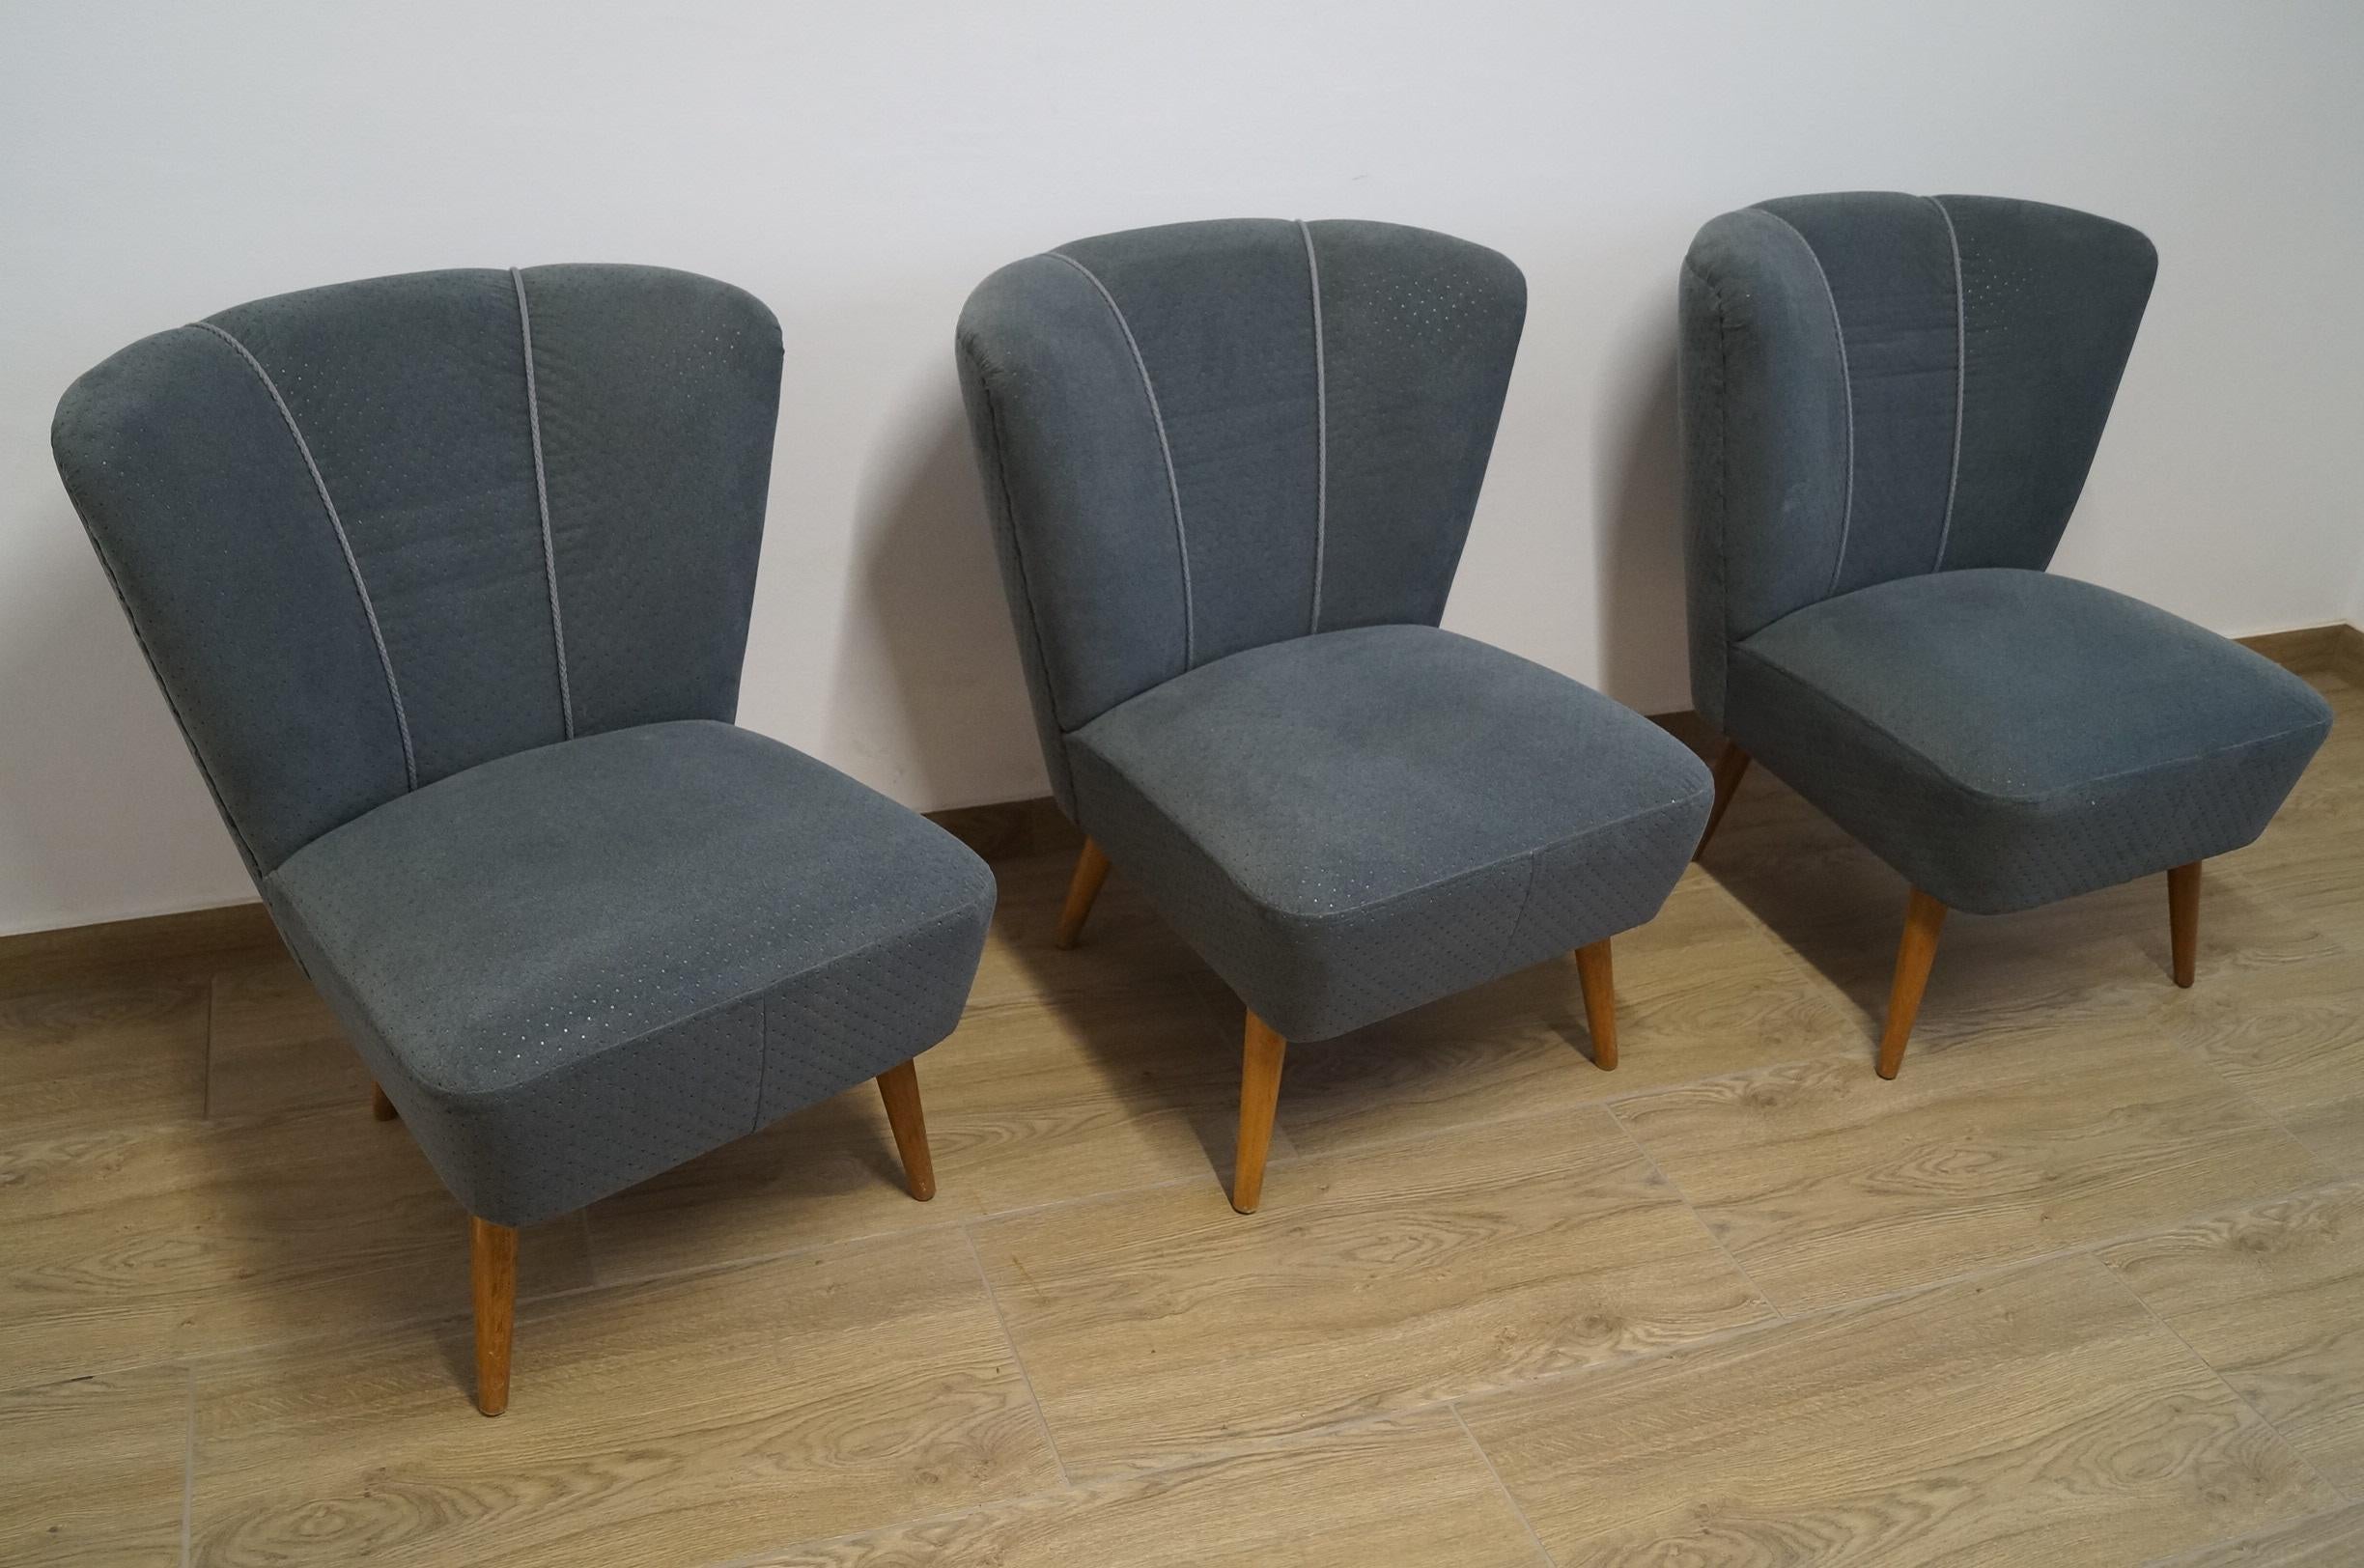 Three club armchairs design from 1960 after renovation.
We present three club armchairs made in Poland.

Every piece of furniture that leaves our workshop from the beginning to the end is subjected to manual renovation, so as to restore original